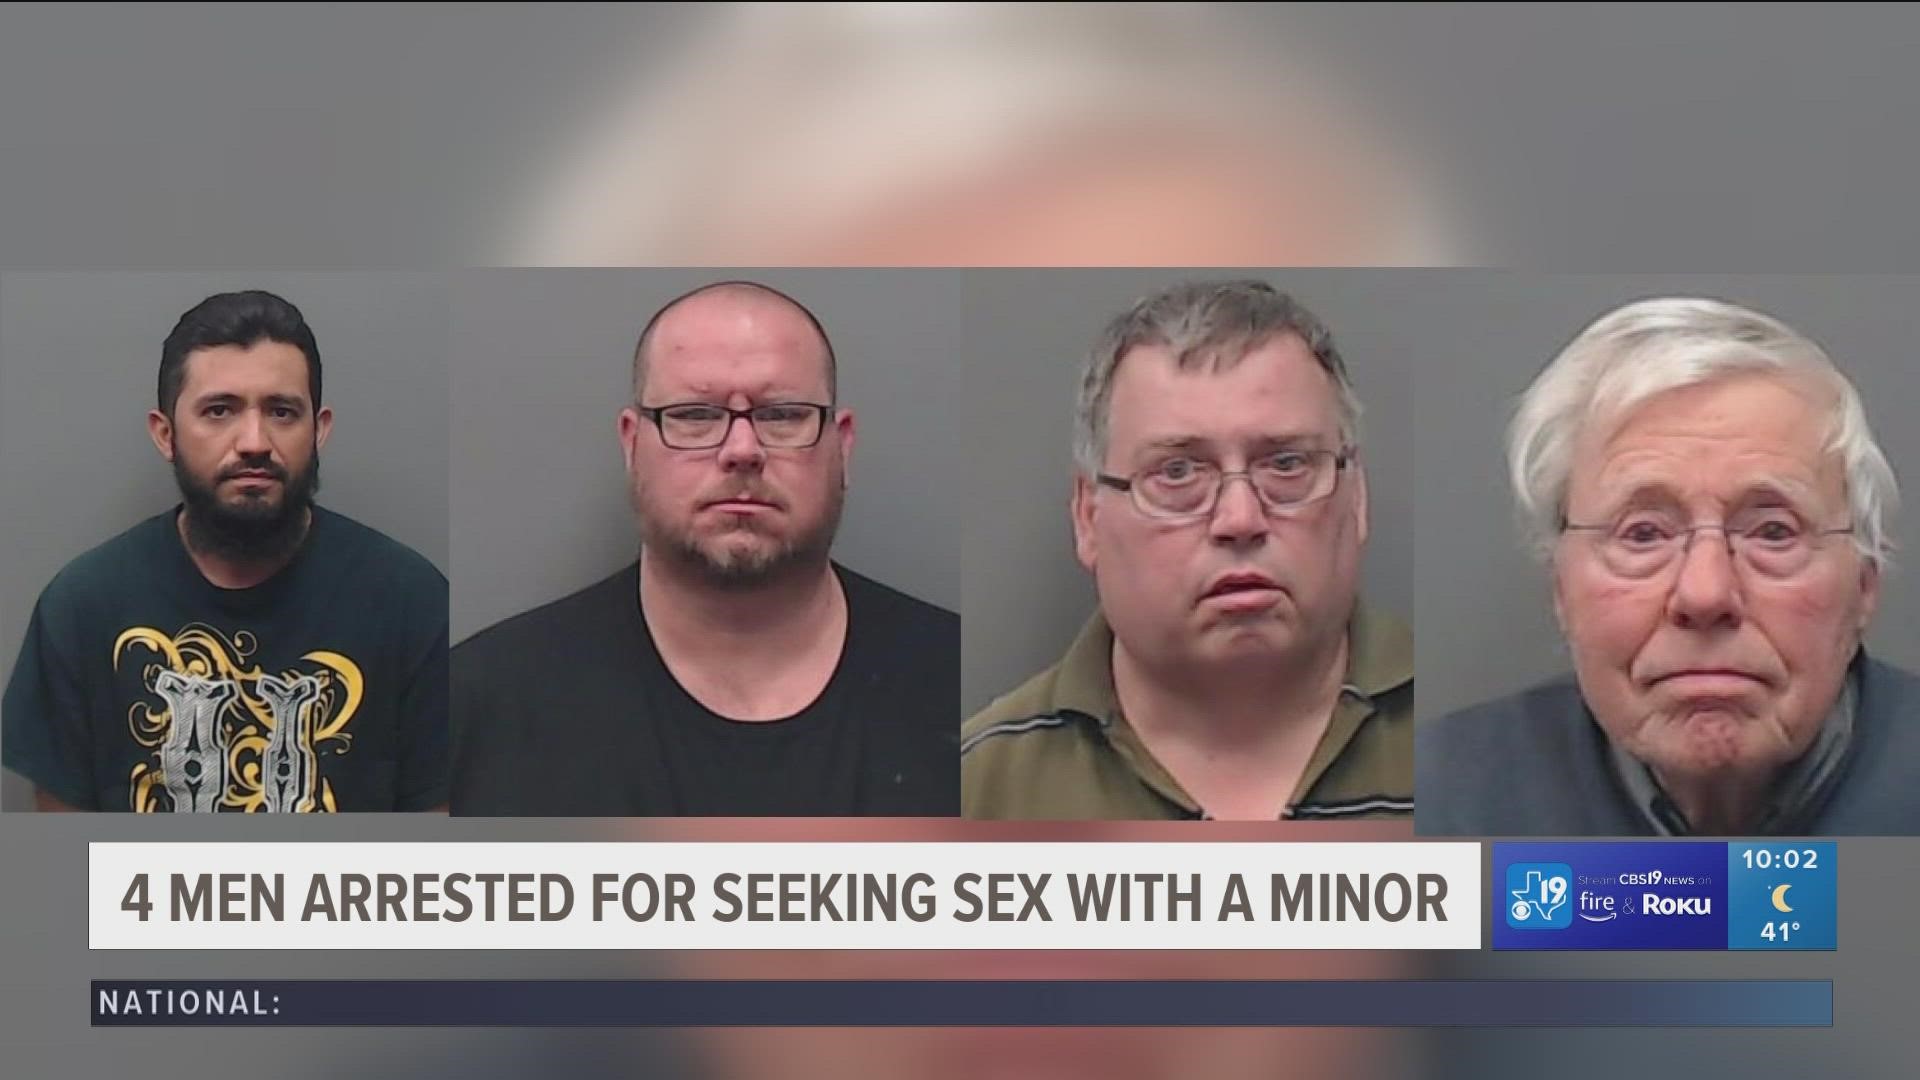 4 Smith County men accused of seeking sex with minor arrested in undercover operation